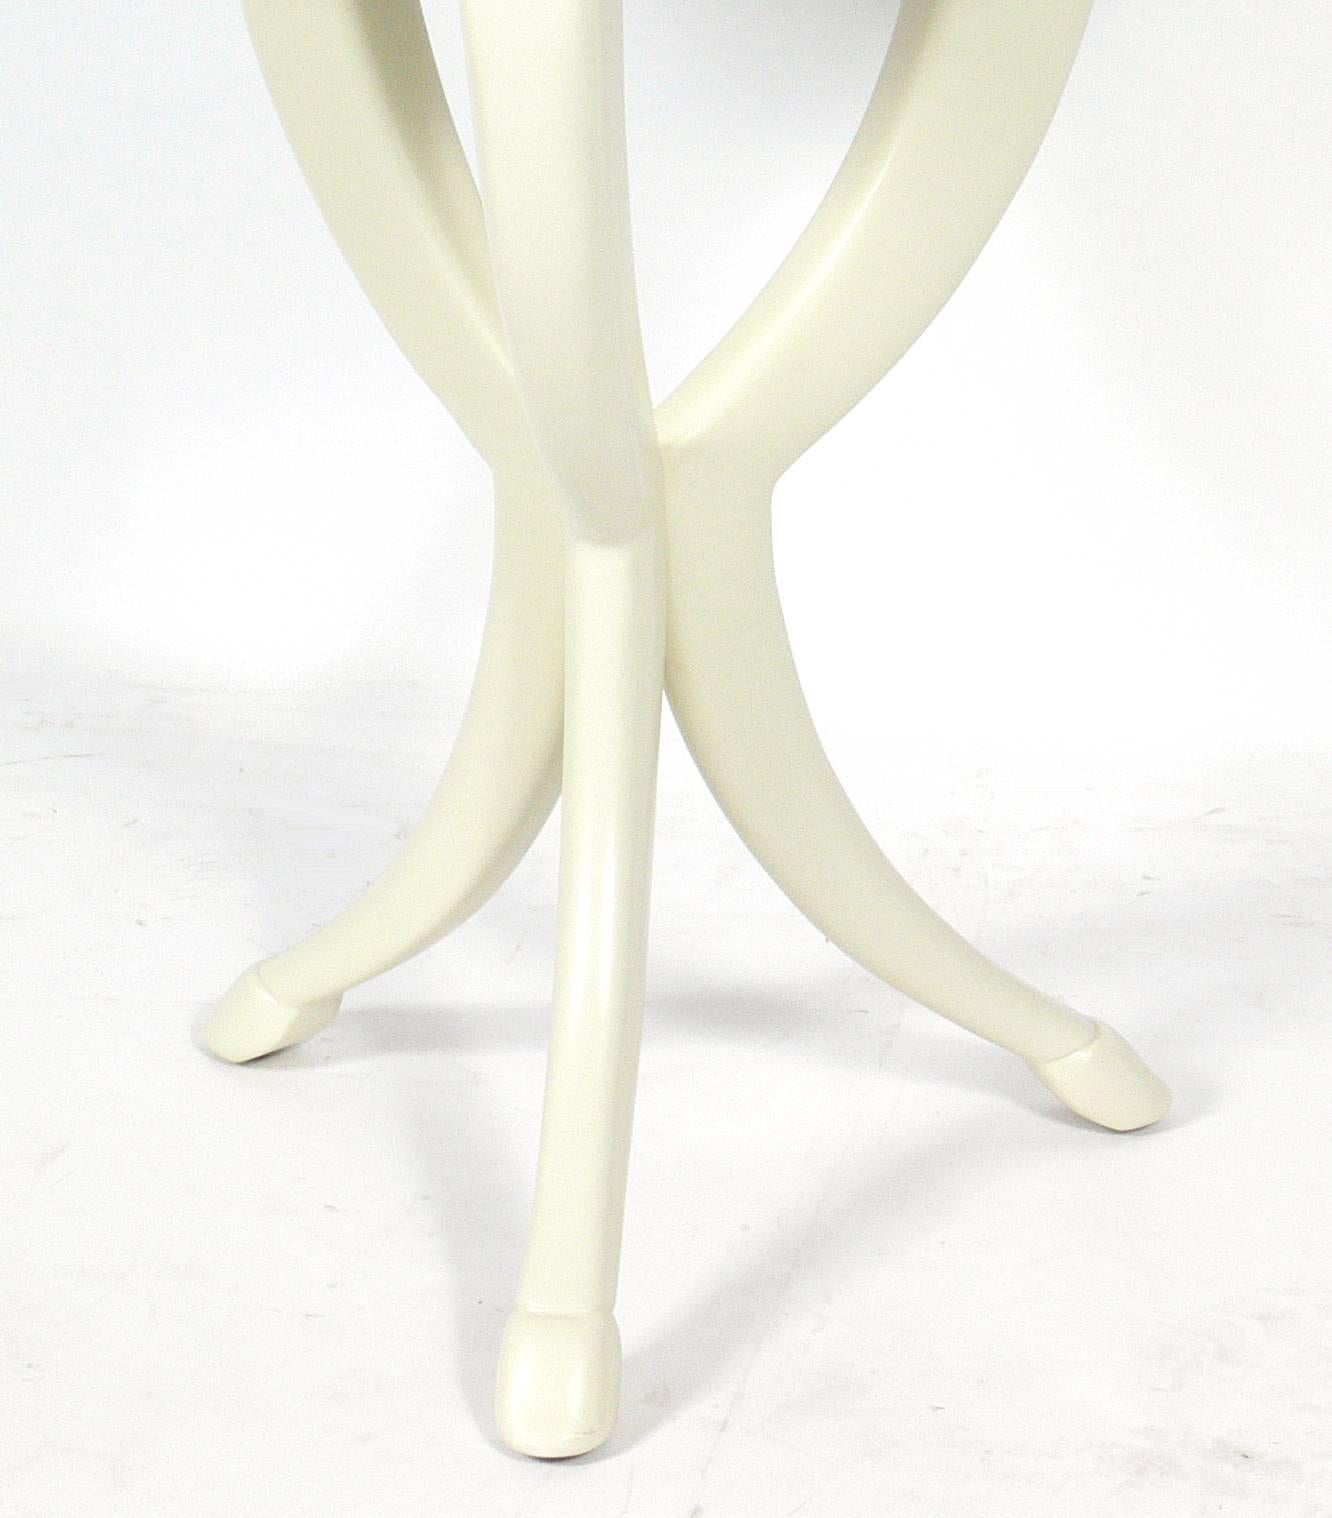 American Glamorous White Lacquer Table by Roger Thomas for Ferrell & Mittman